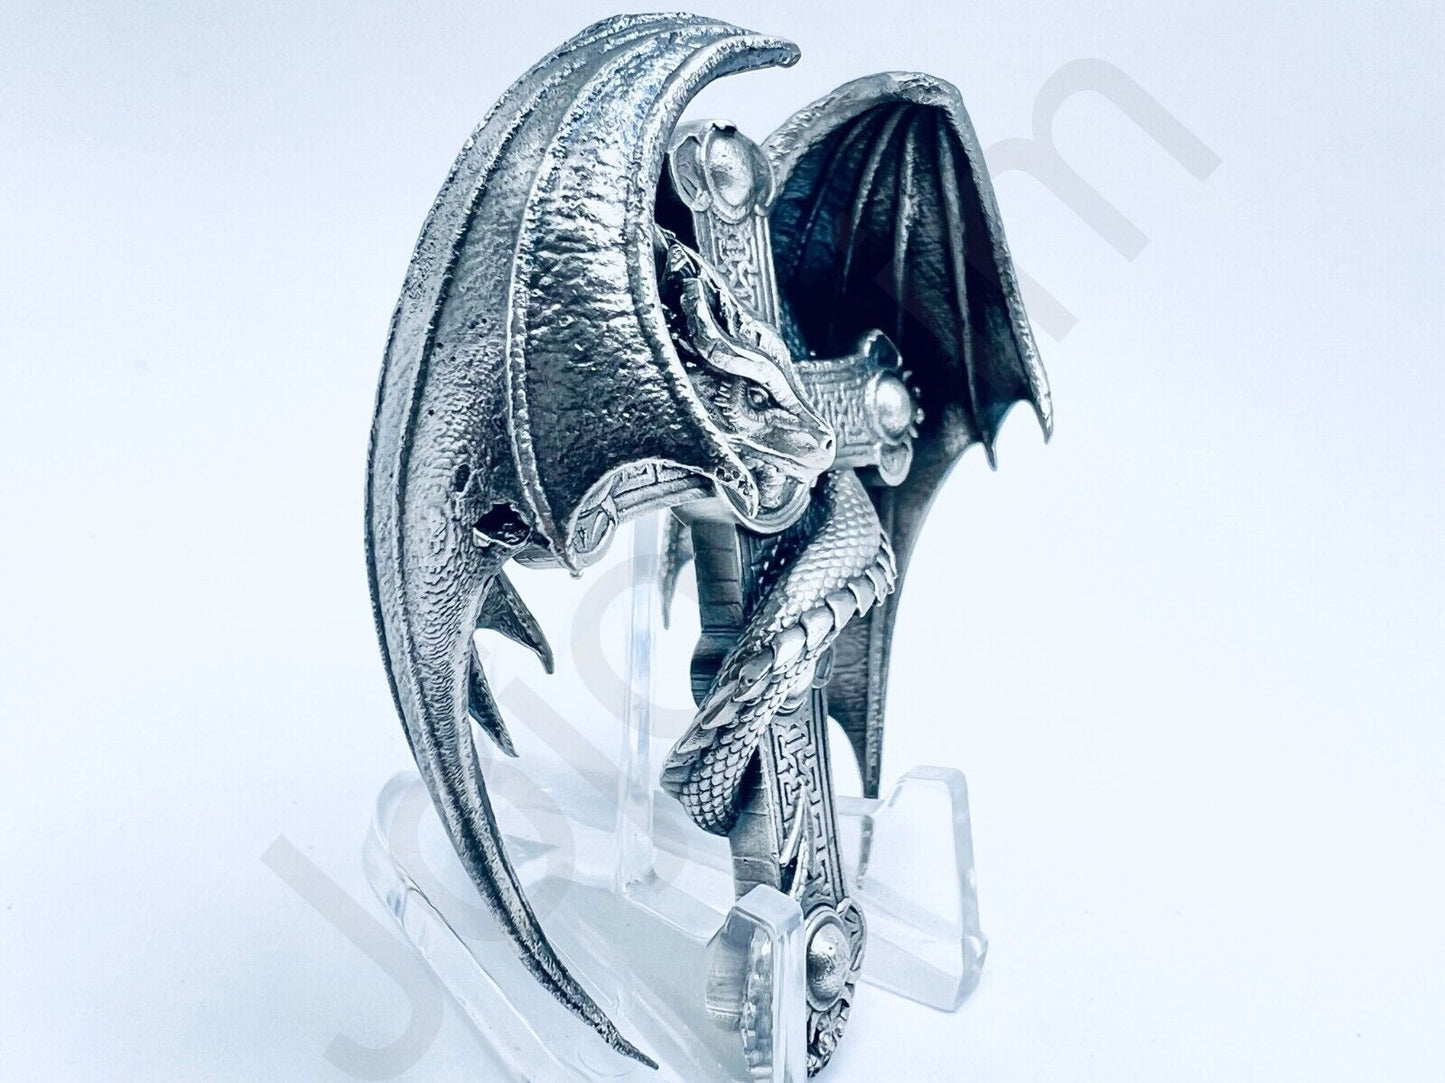 2.8 oz Hand Poured .999+ Fine Silver Bar Statue "Dragon Cross" By Gold Spartan